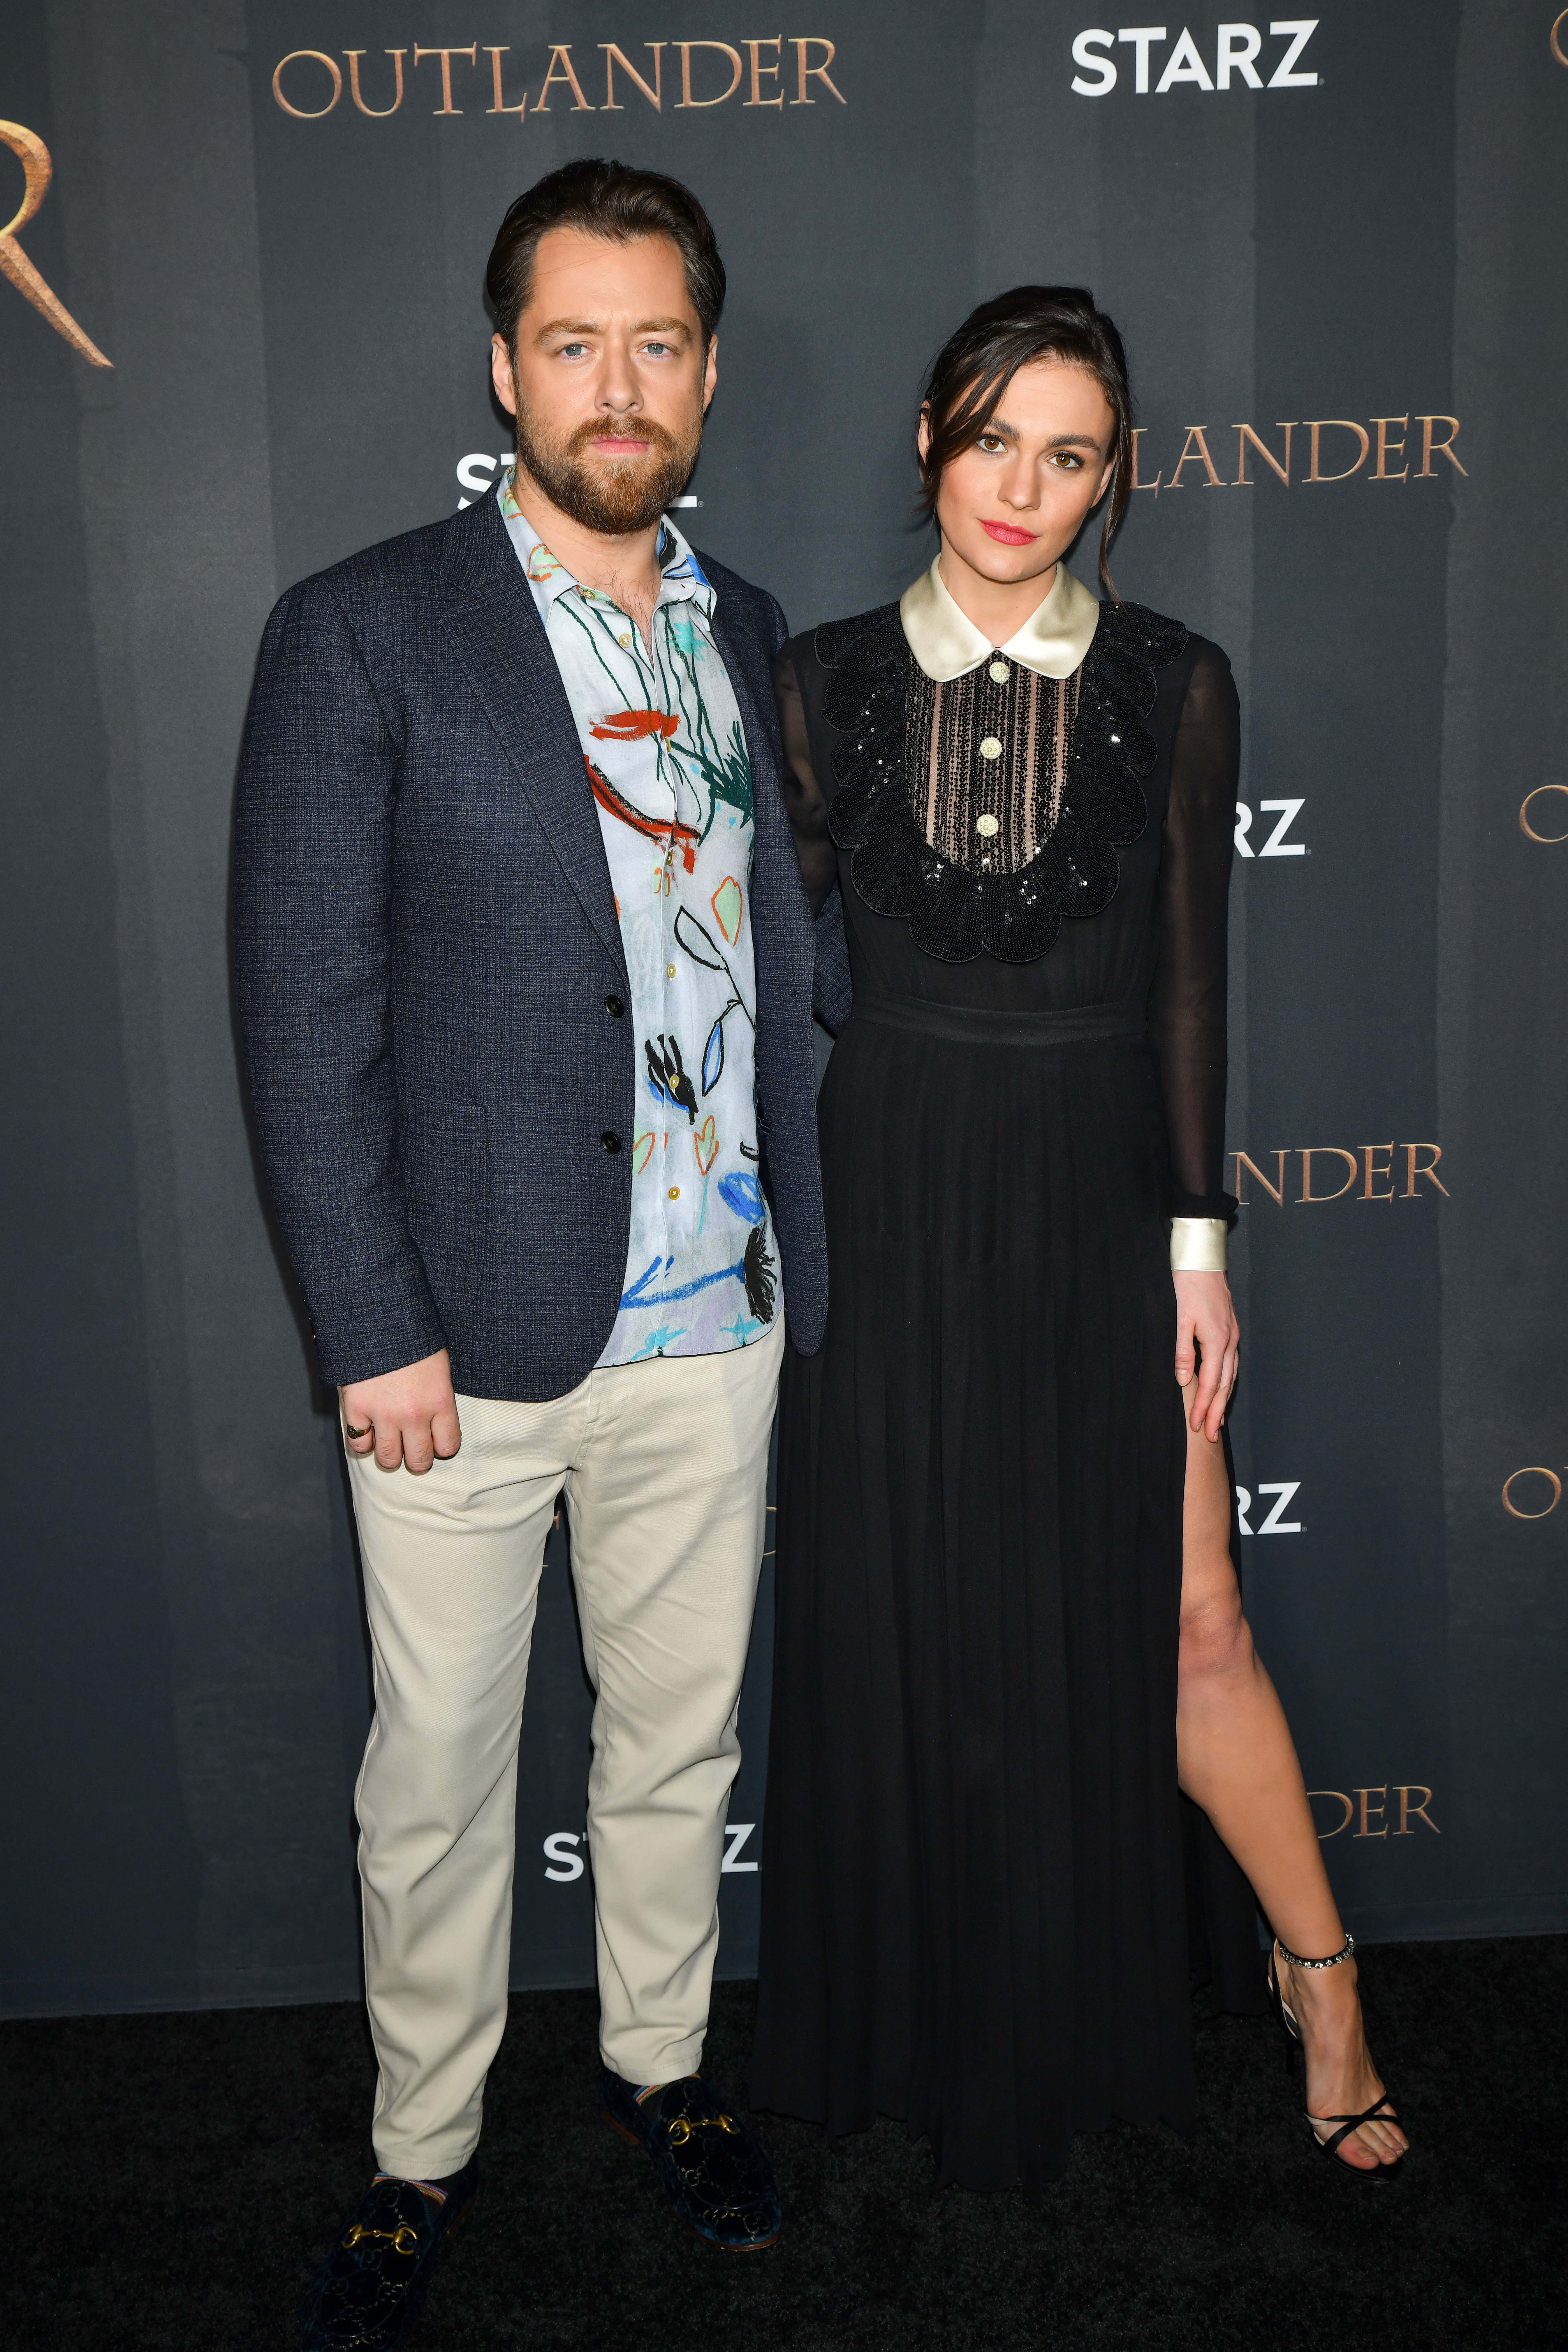 Richard Rankin and Sophie Skelton arrive at the STARZ 'Outlander' Season 6 Premiere at the Wolf Theater in North Hollywood, CA on March 09, 2022 |  Source: Getty Images